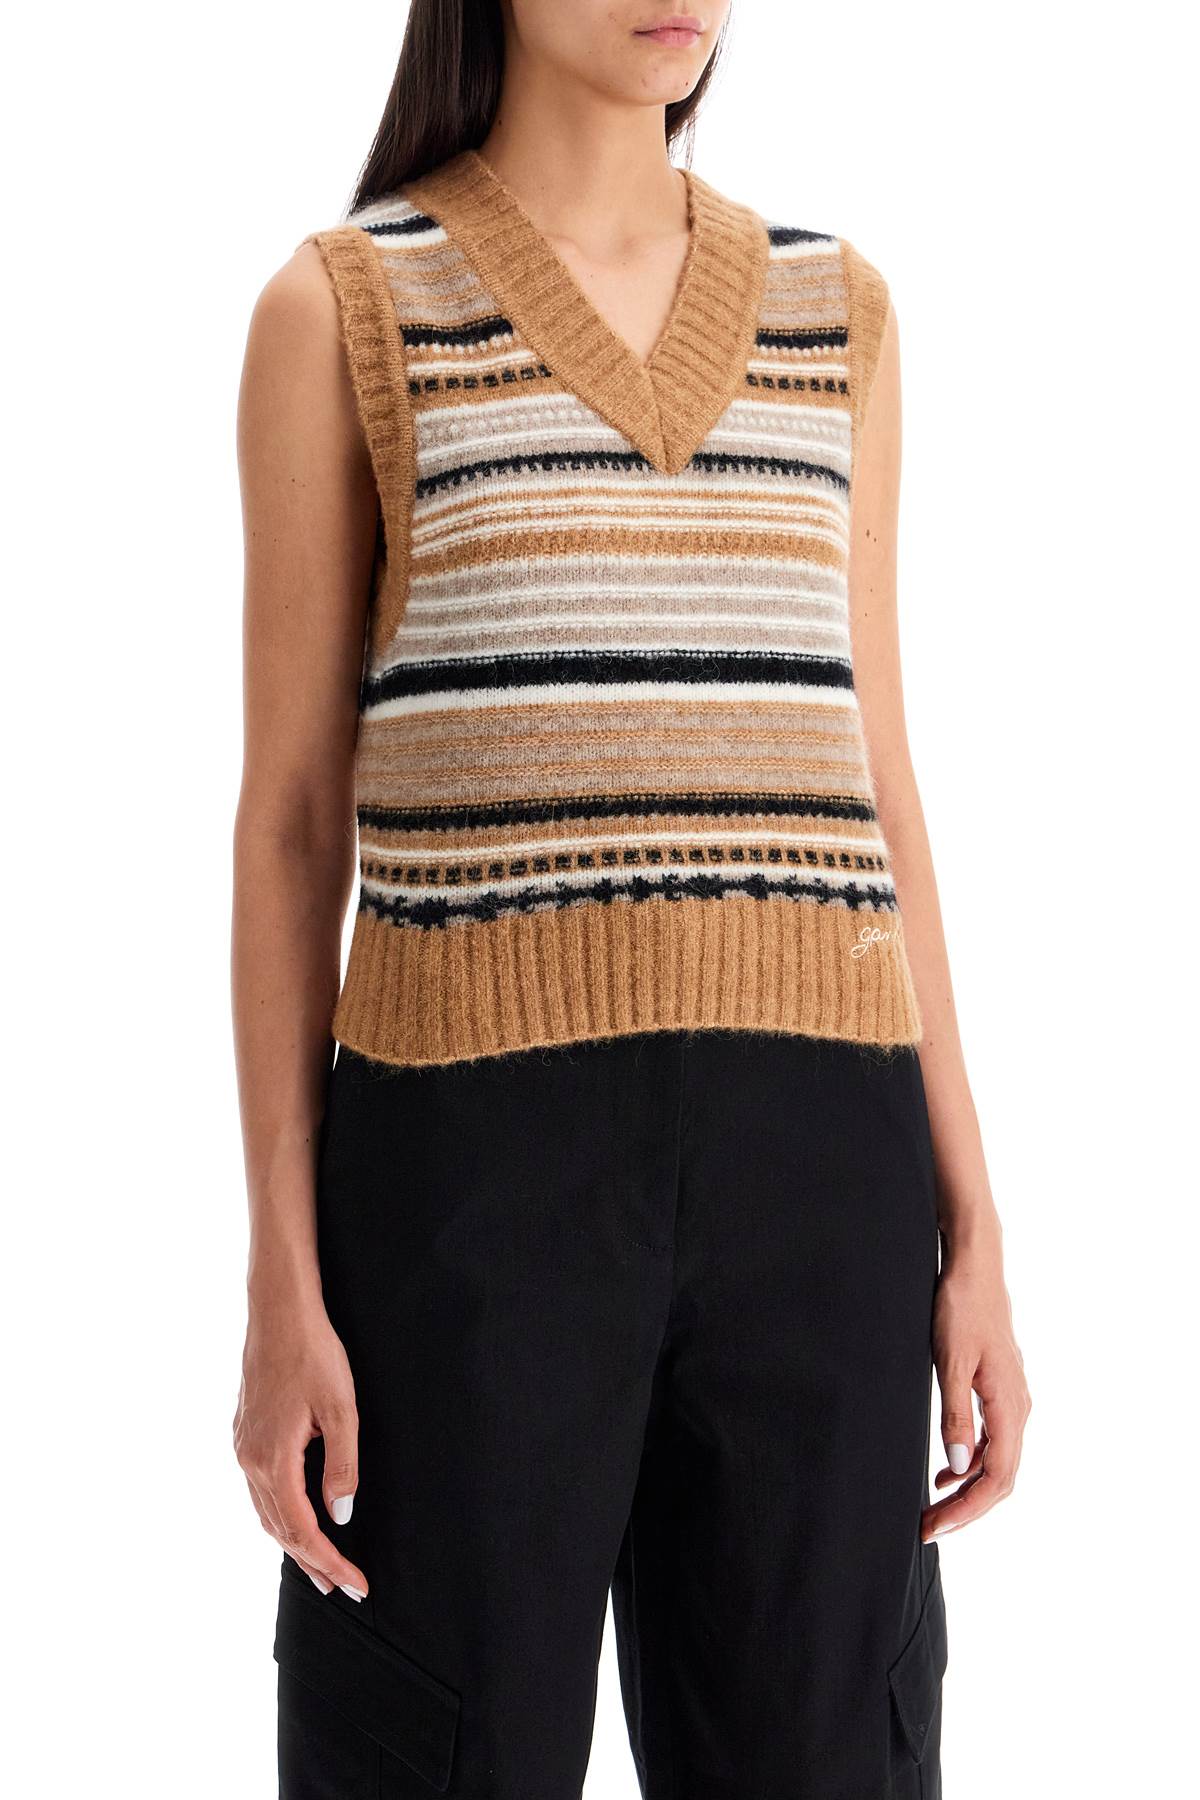 Ganni "soft striped knit vest with a comfortable - Beige